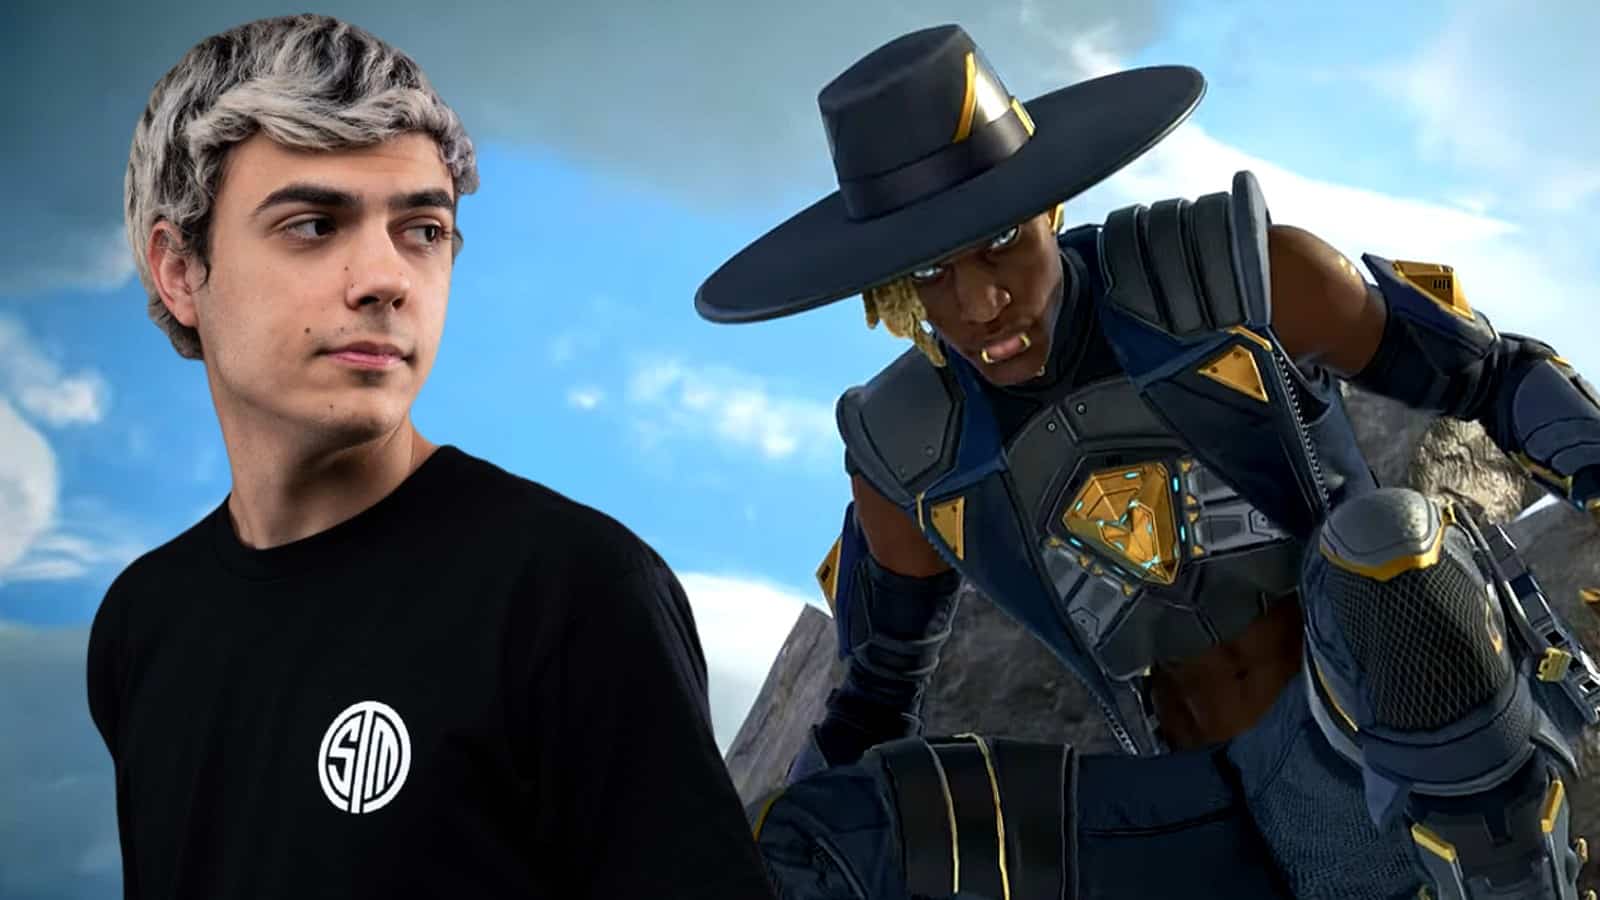 ImperialHal explains why Seer is “broken” and makes Apex Legends “easy  mode” - Dexerto